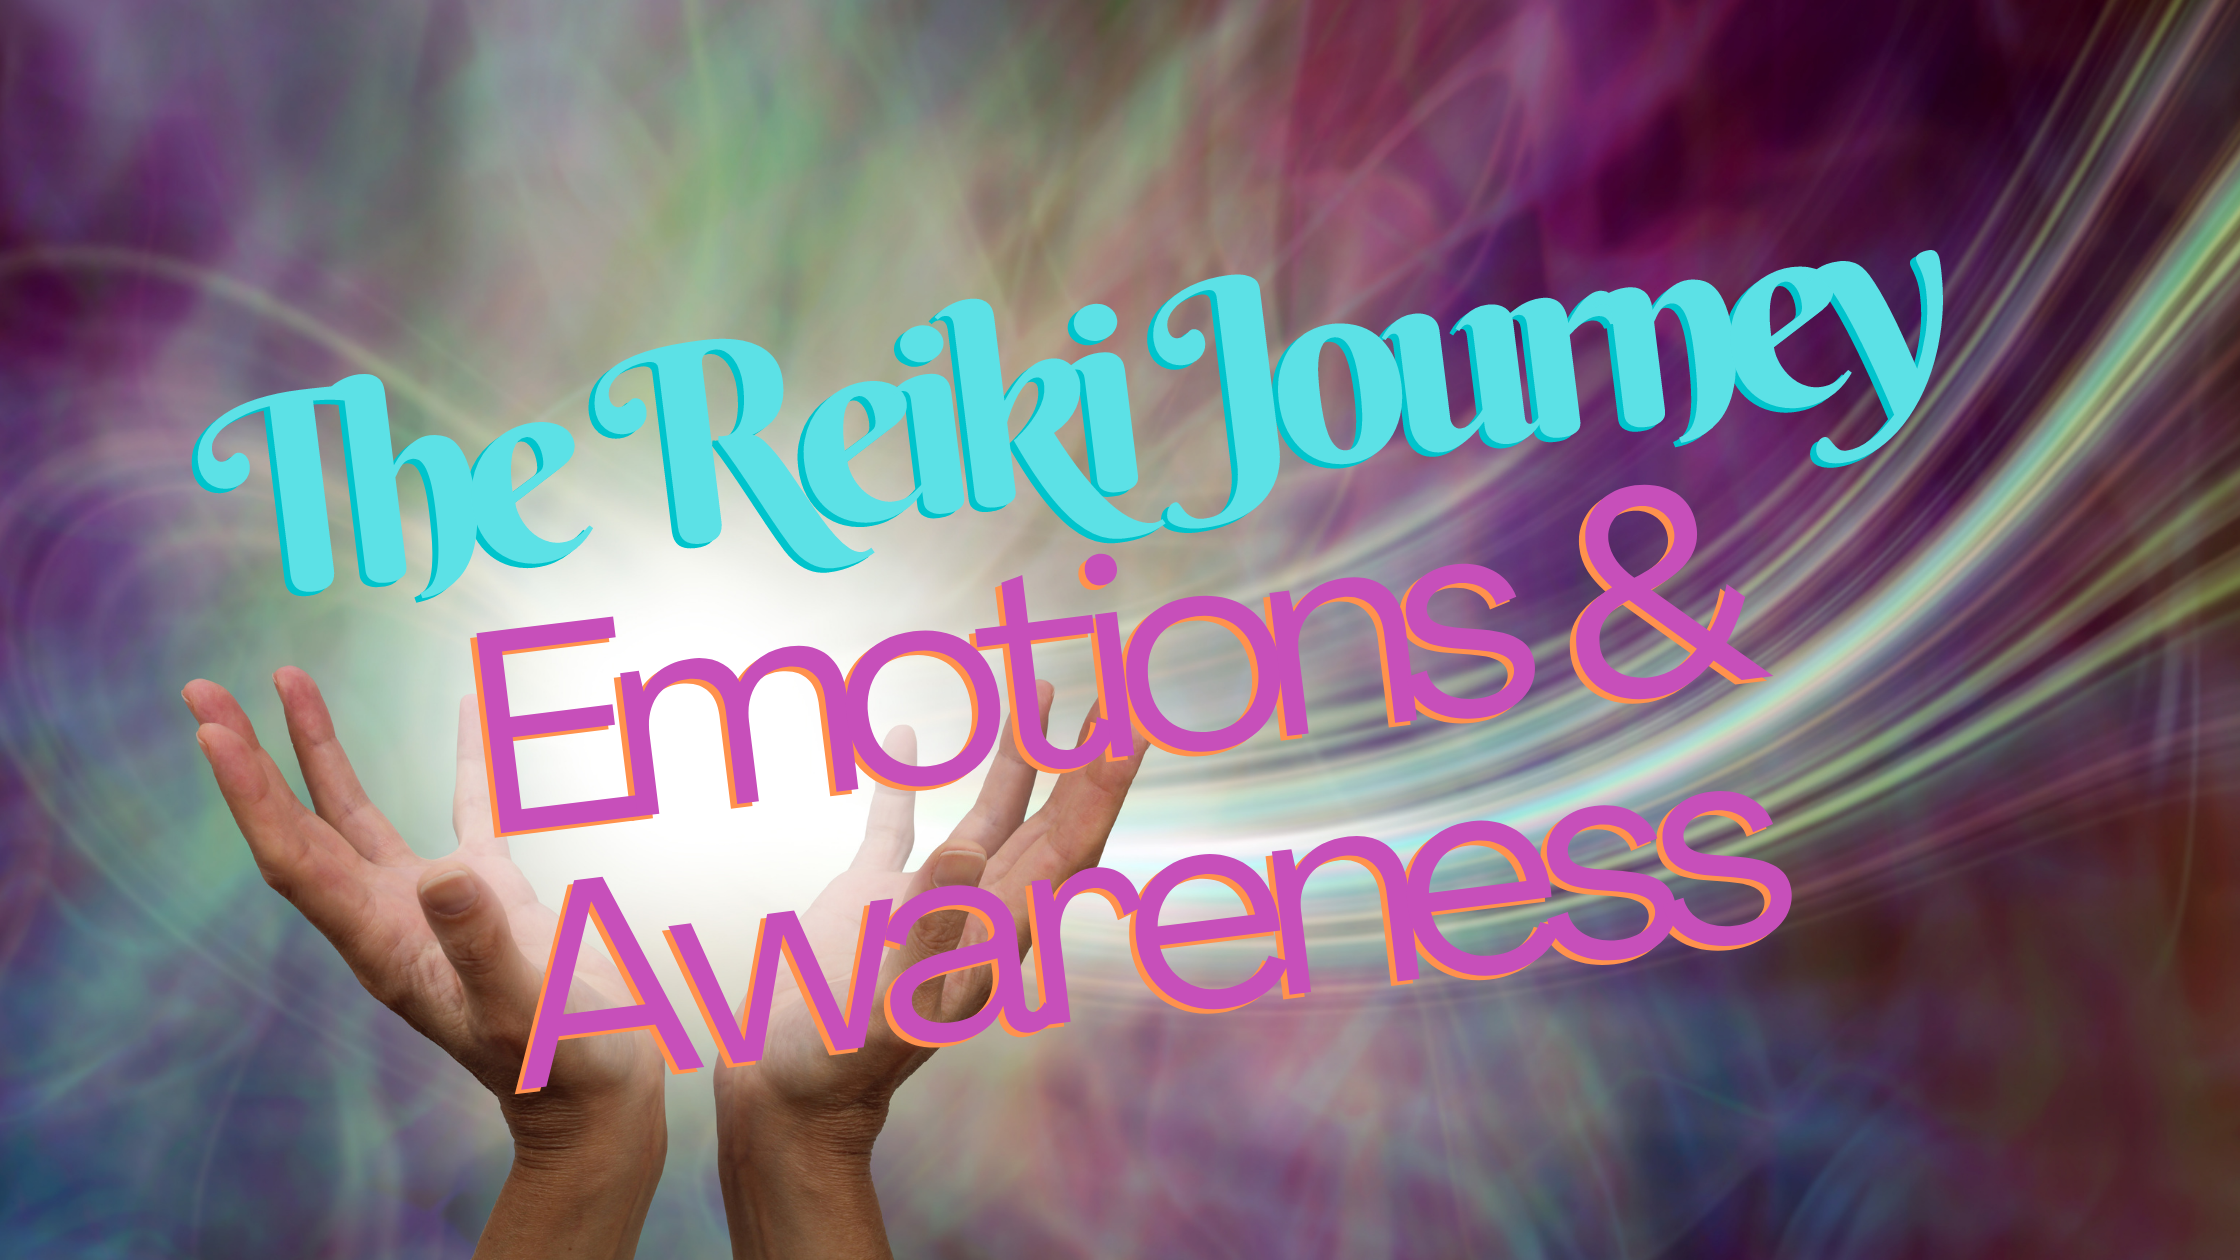 The Reiki Journey: Emotions and Awareness